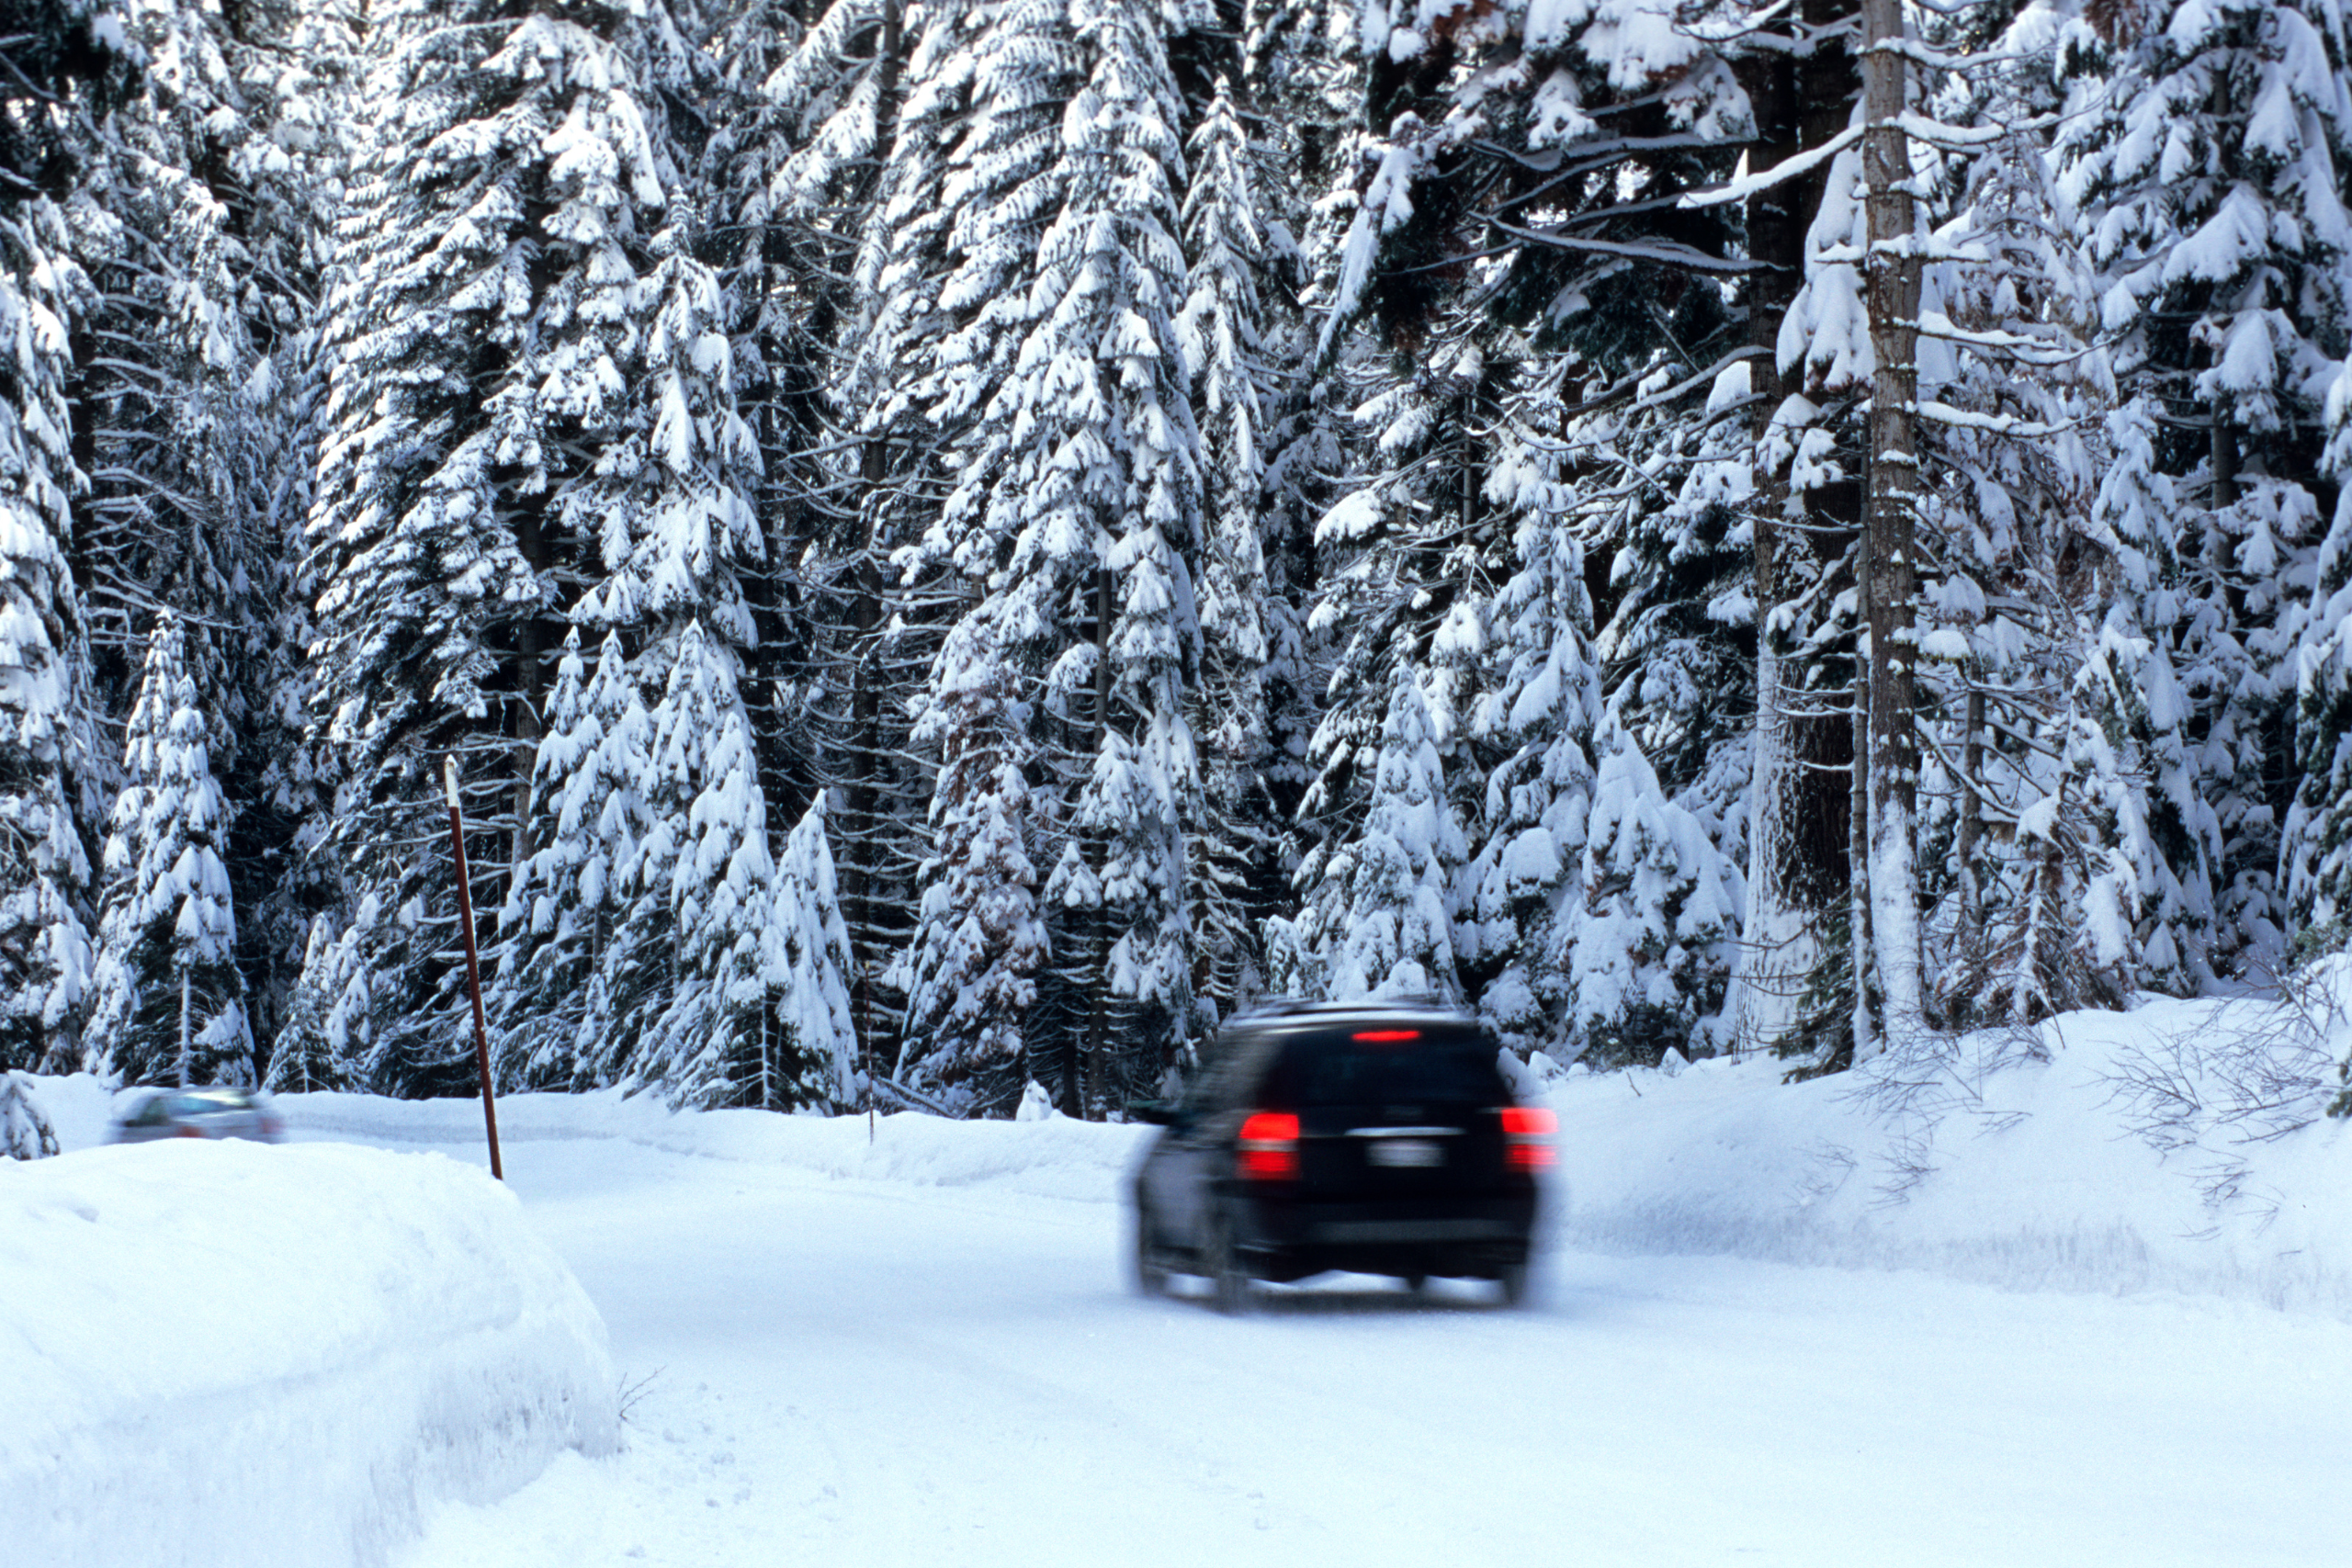 SUV driving on a snow-covered forest road with tall pine trees laden with fresh snow on either side, conveying the beauty and challenges of winter driving in forested areas.